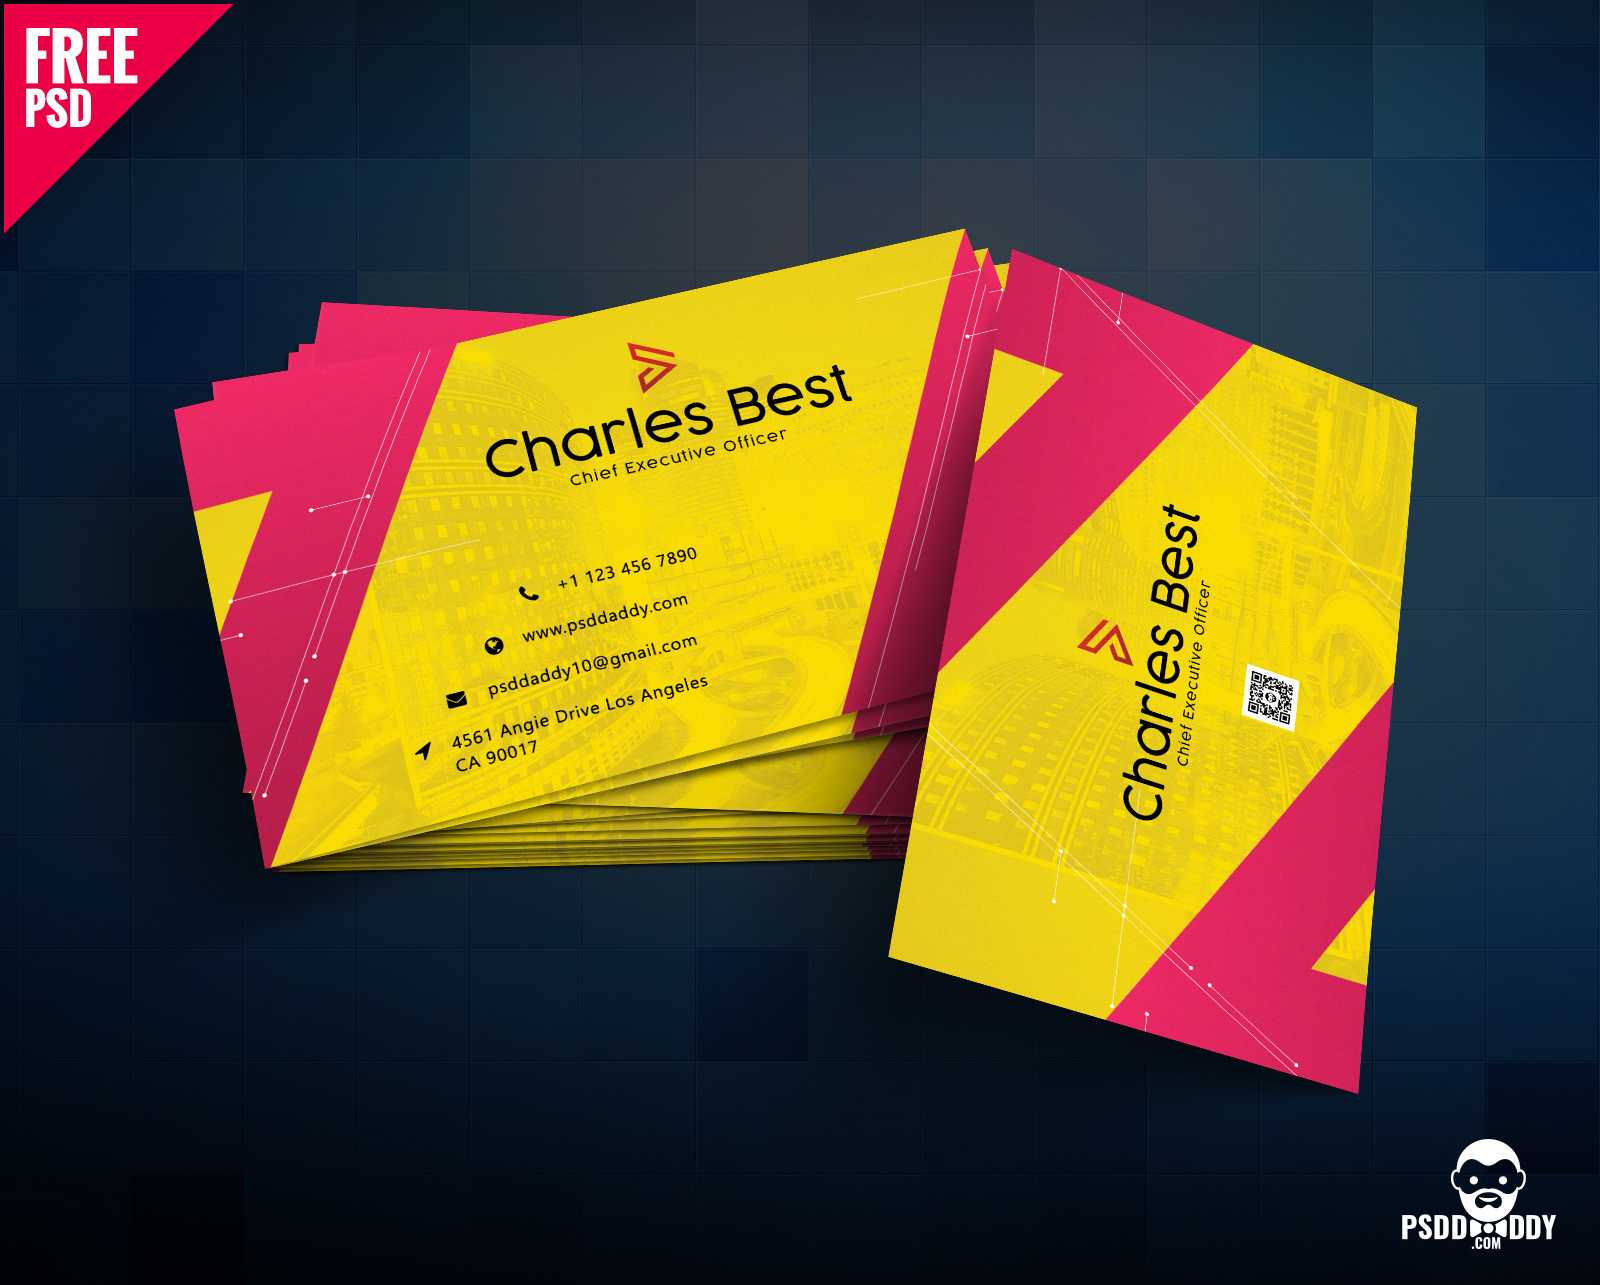 Download] Creative Business Card Free Psd | Psddaddy With Regard To Business Card Size Template Psd